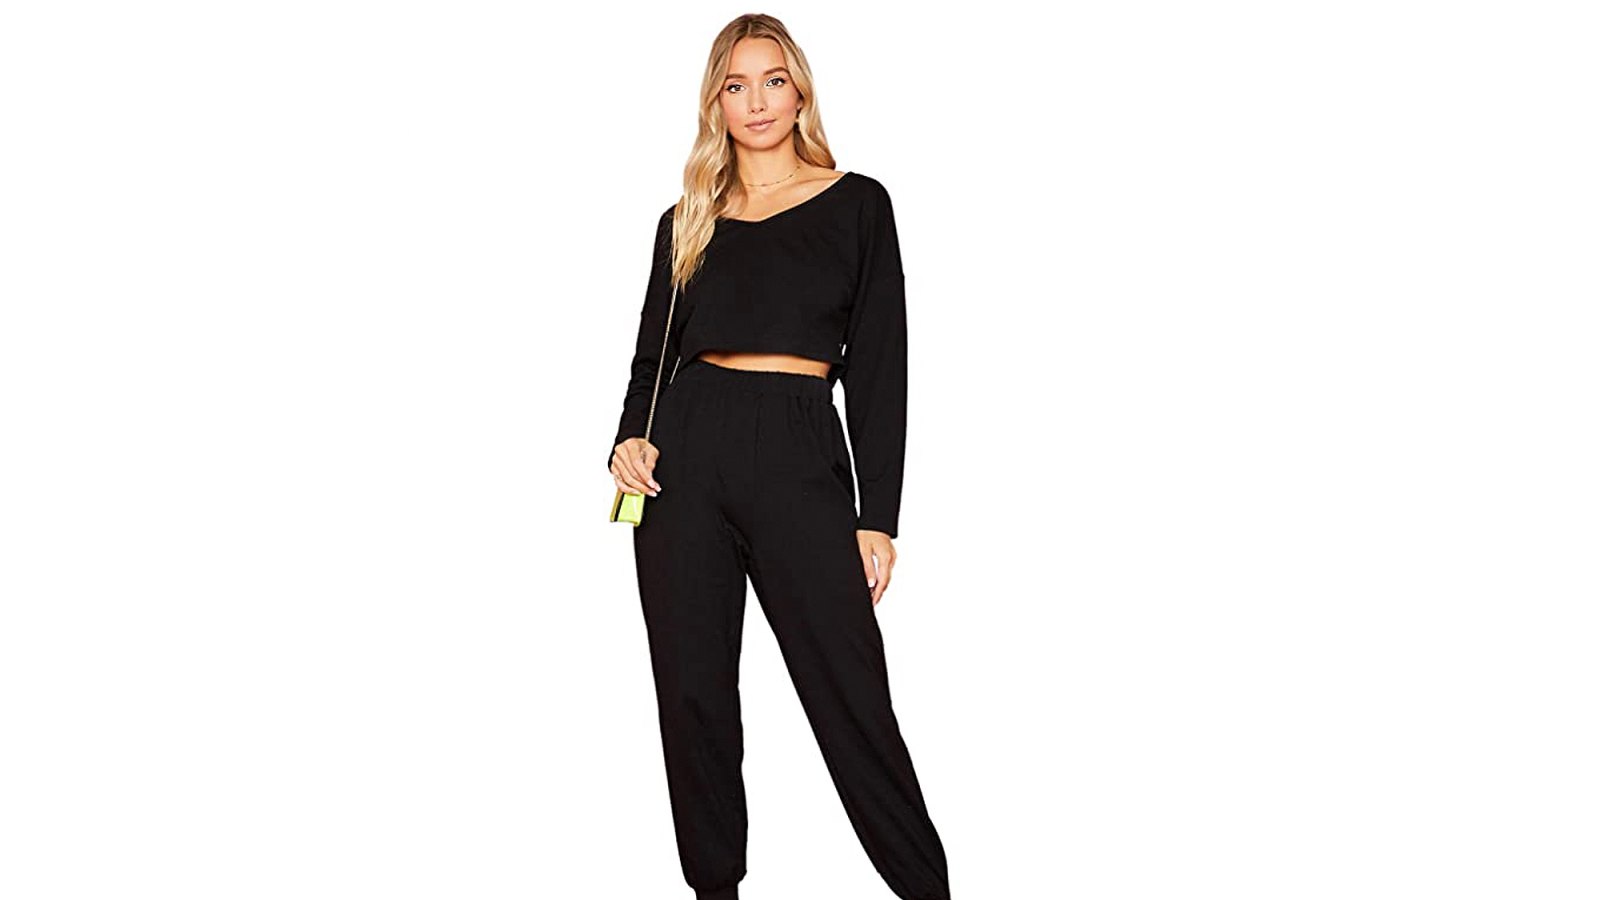 SweatyRocks Women's 2 Pieces Outfits Long Sleeve Crop Top and Sweatpants Jogger Set